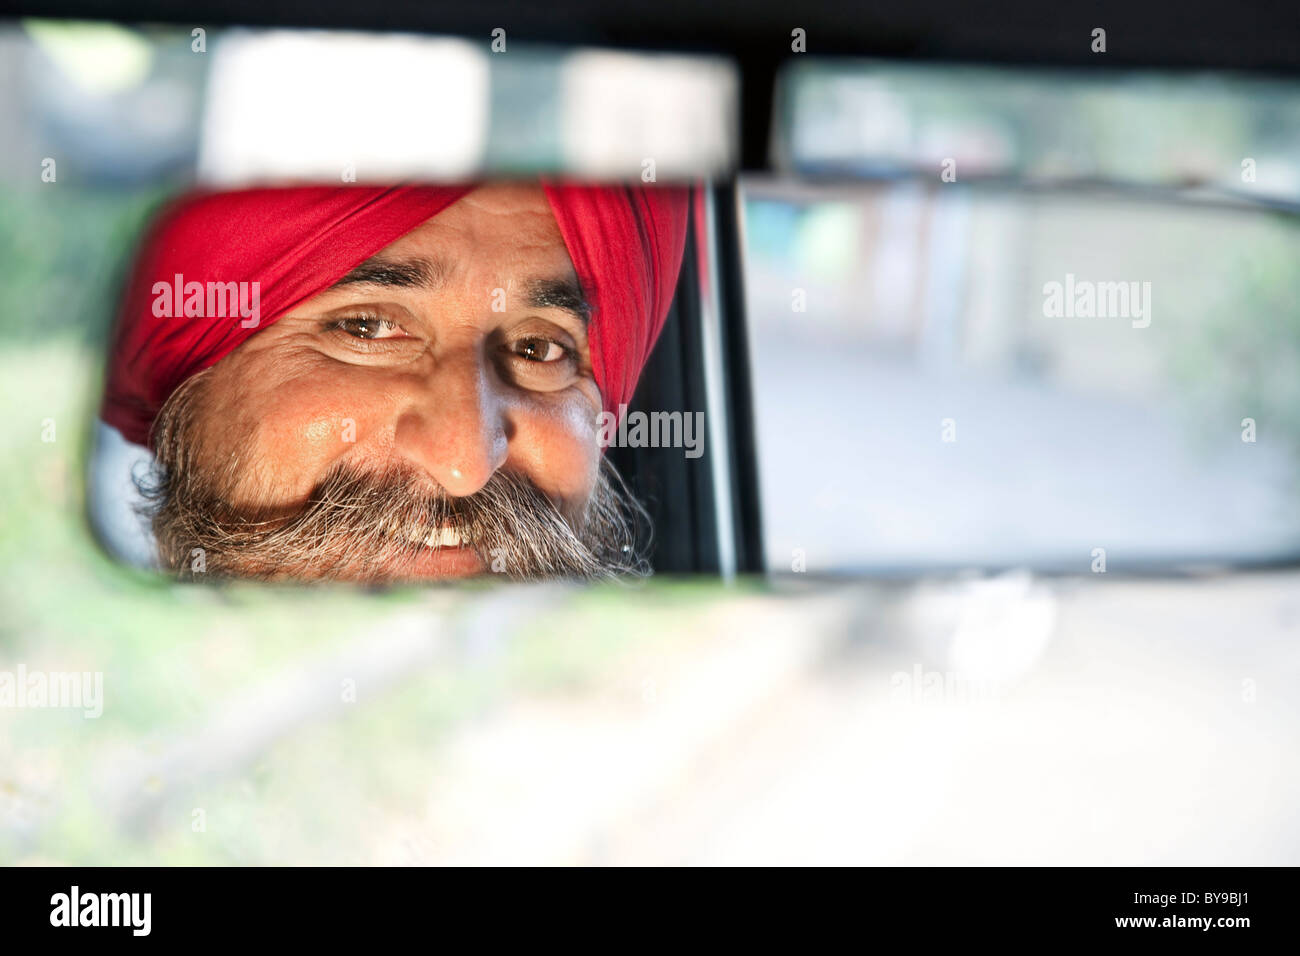 Sikh taxi driver looking into the rear view mirror Stock Photo